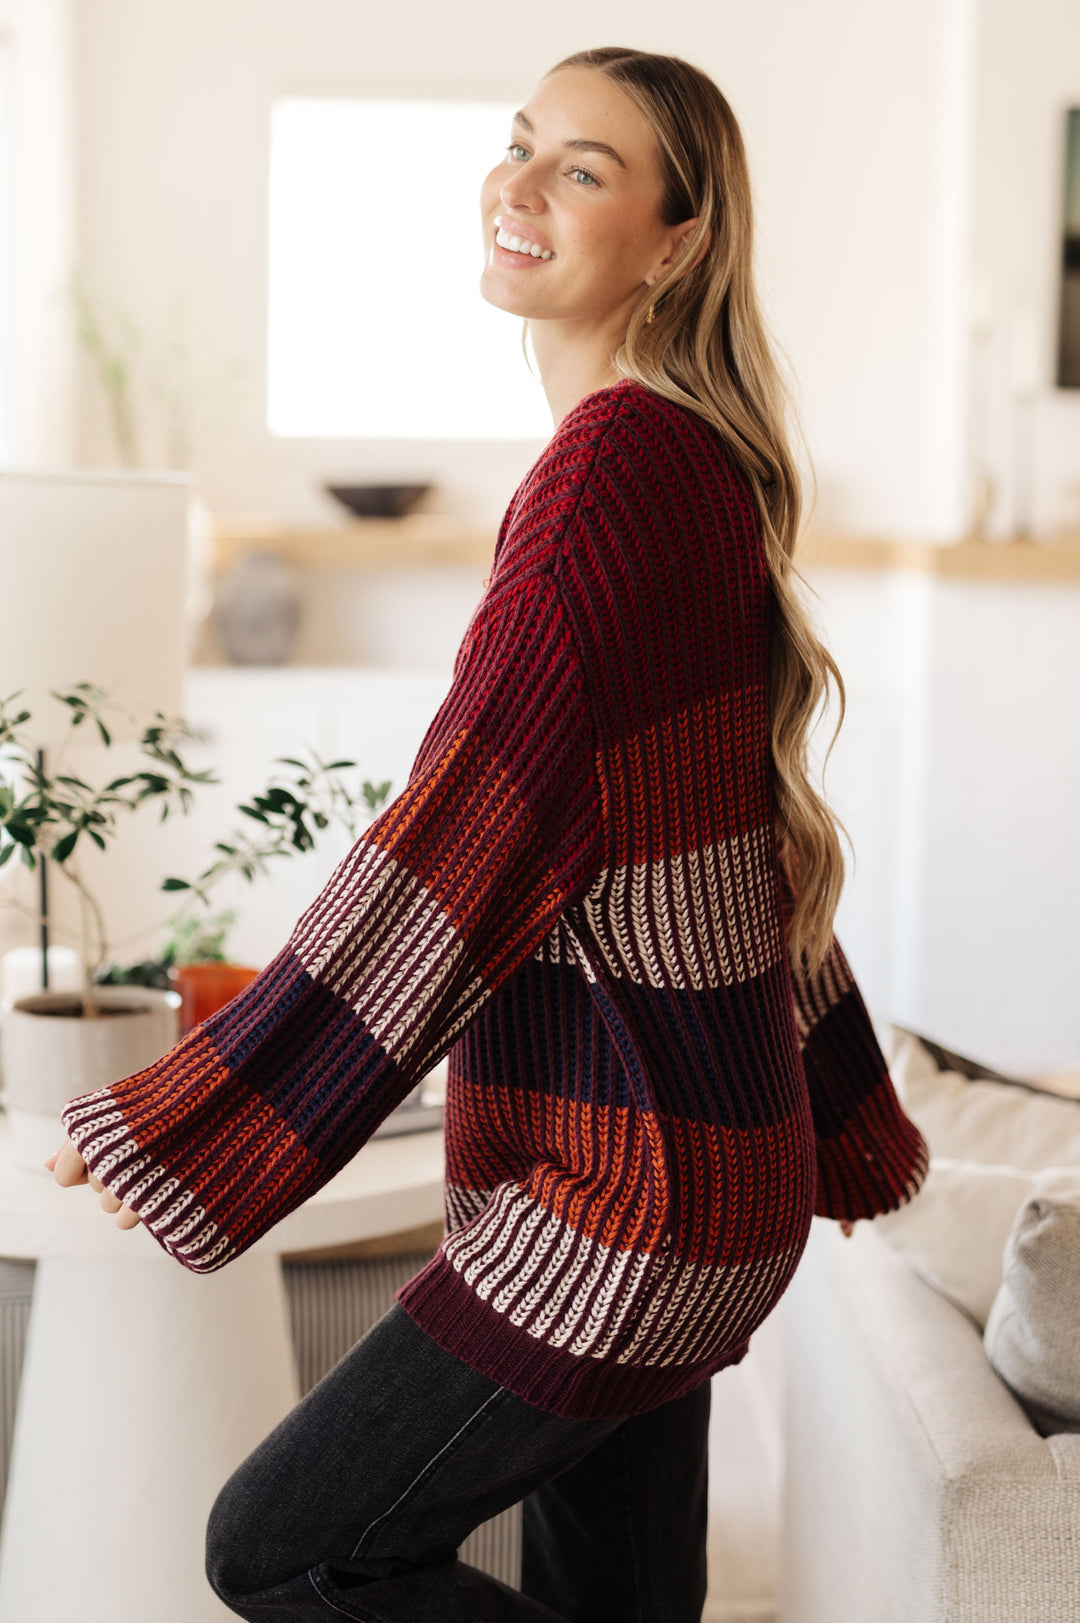 World of Wonder Striped Sweater-Sweaters/Sweatshirts-Inspired by Justeen-Women's Clothing Boutique